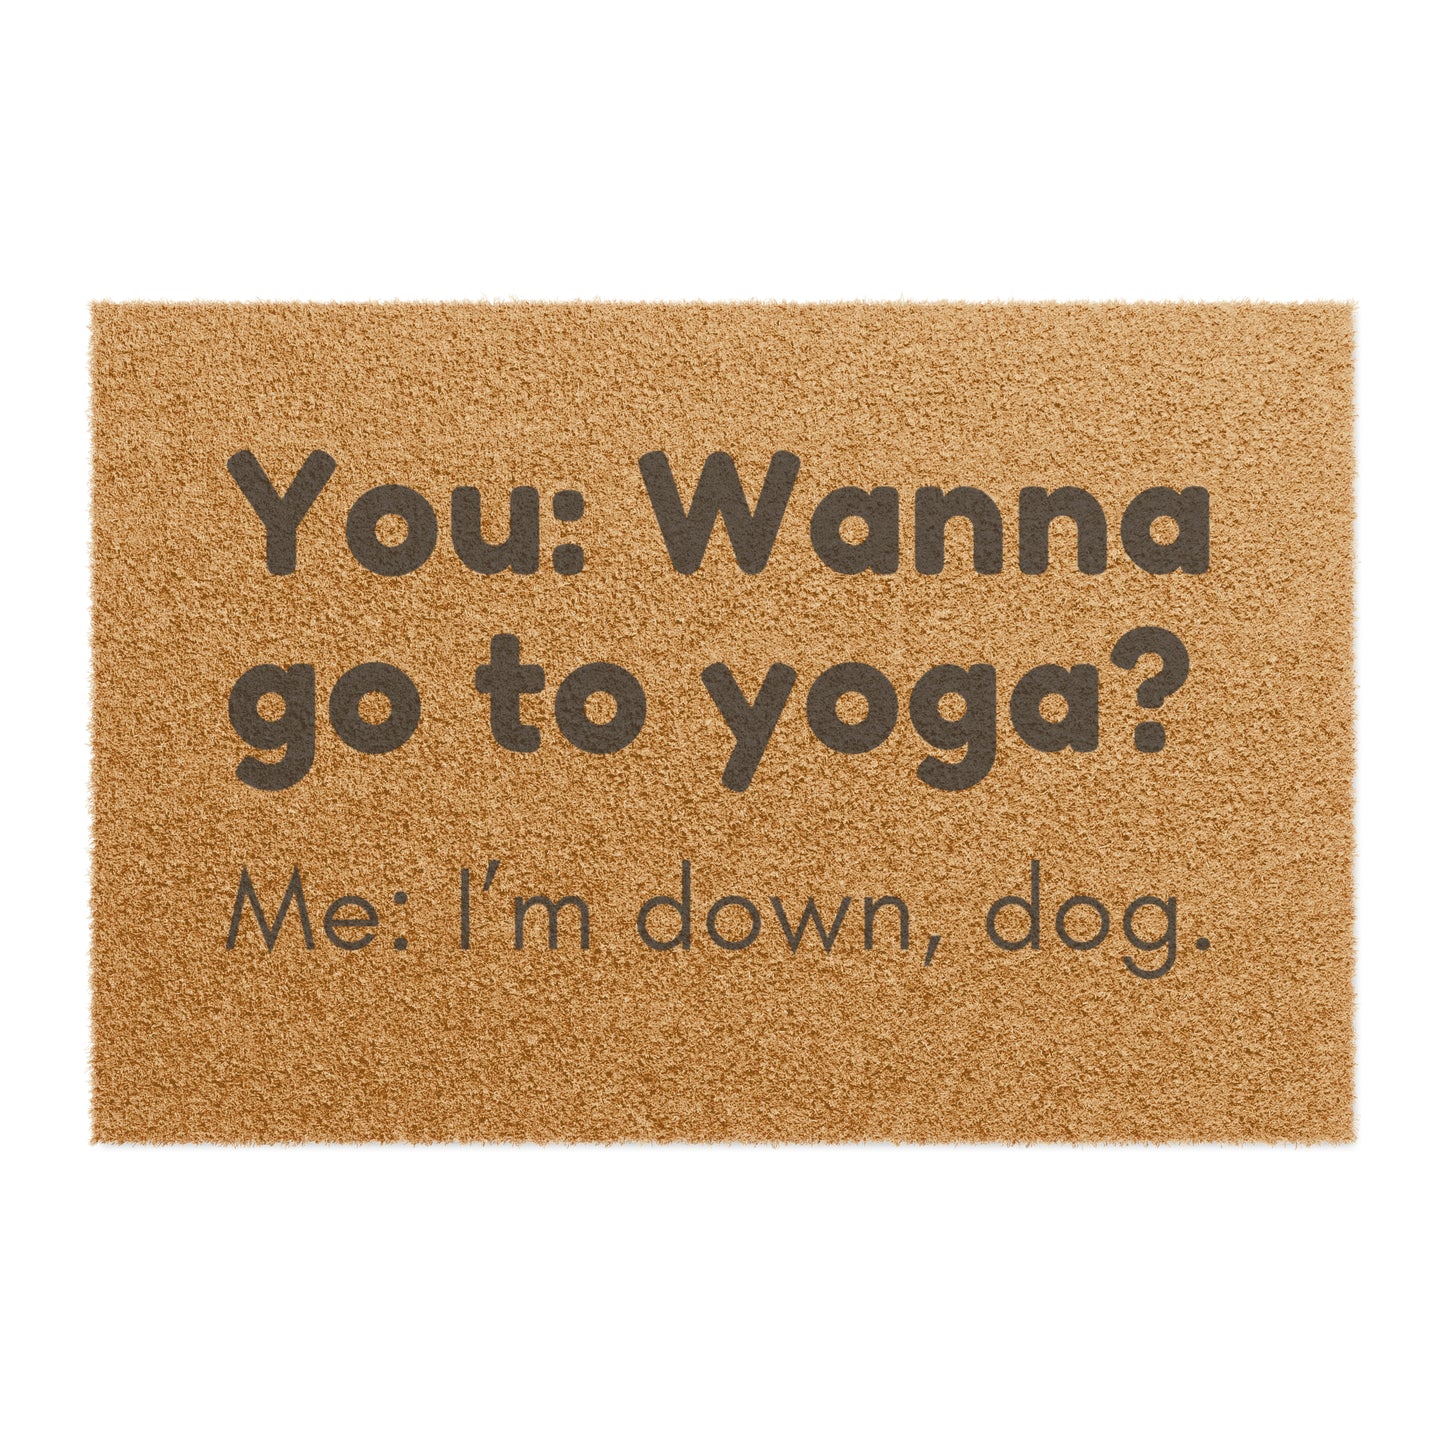 You: Want to Go to Yoga? - Yoga Doormat